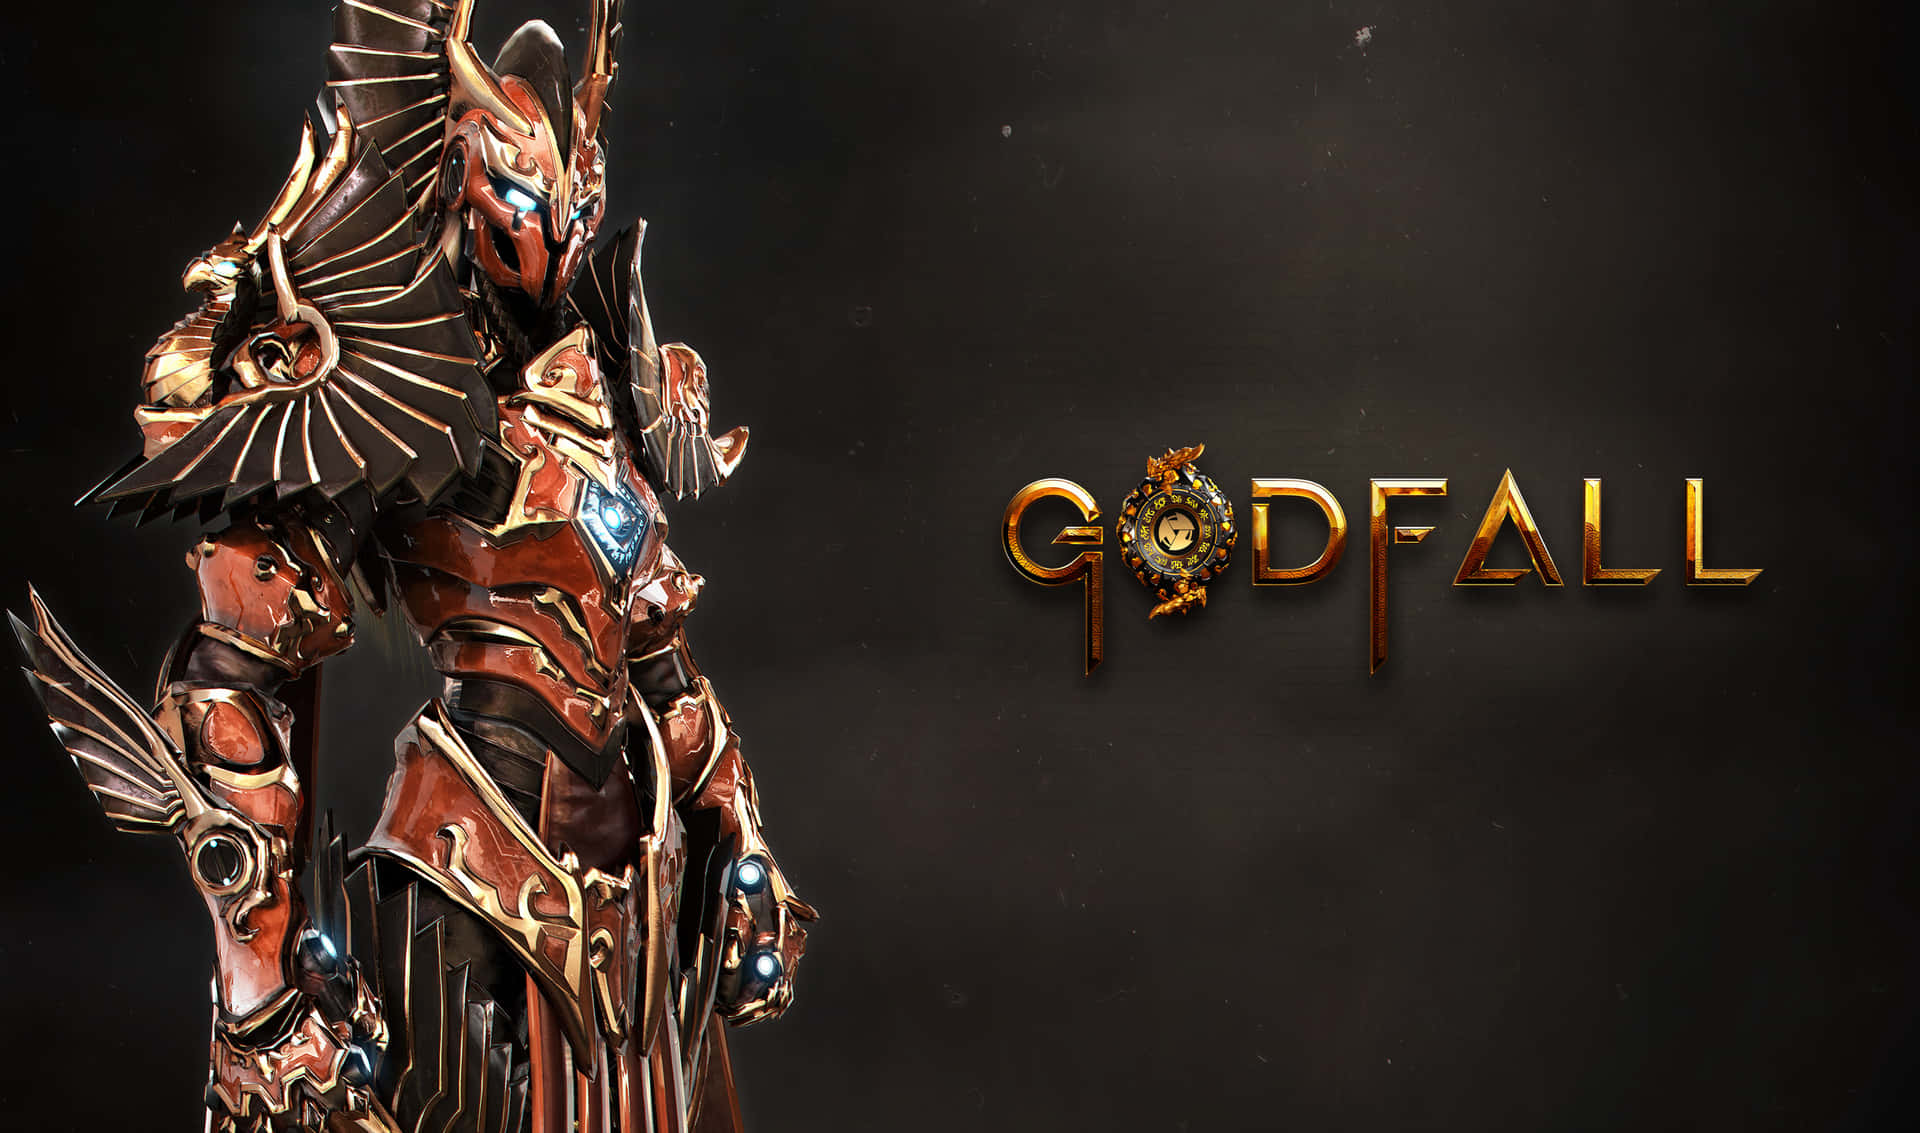 Defend the Realms in "Godfall"